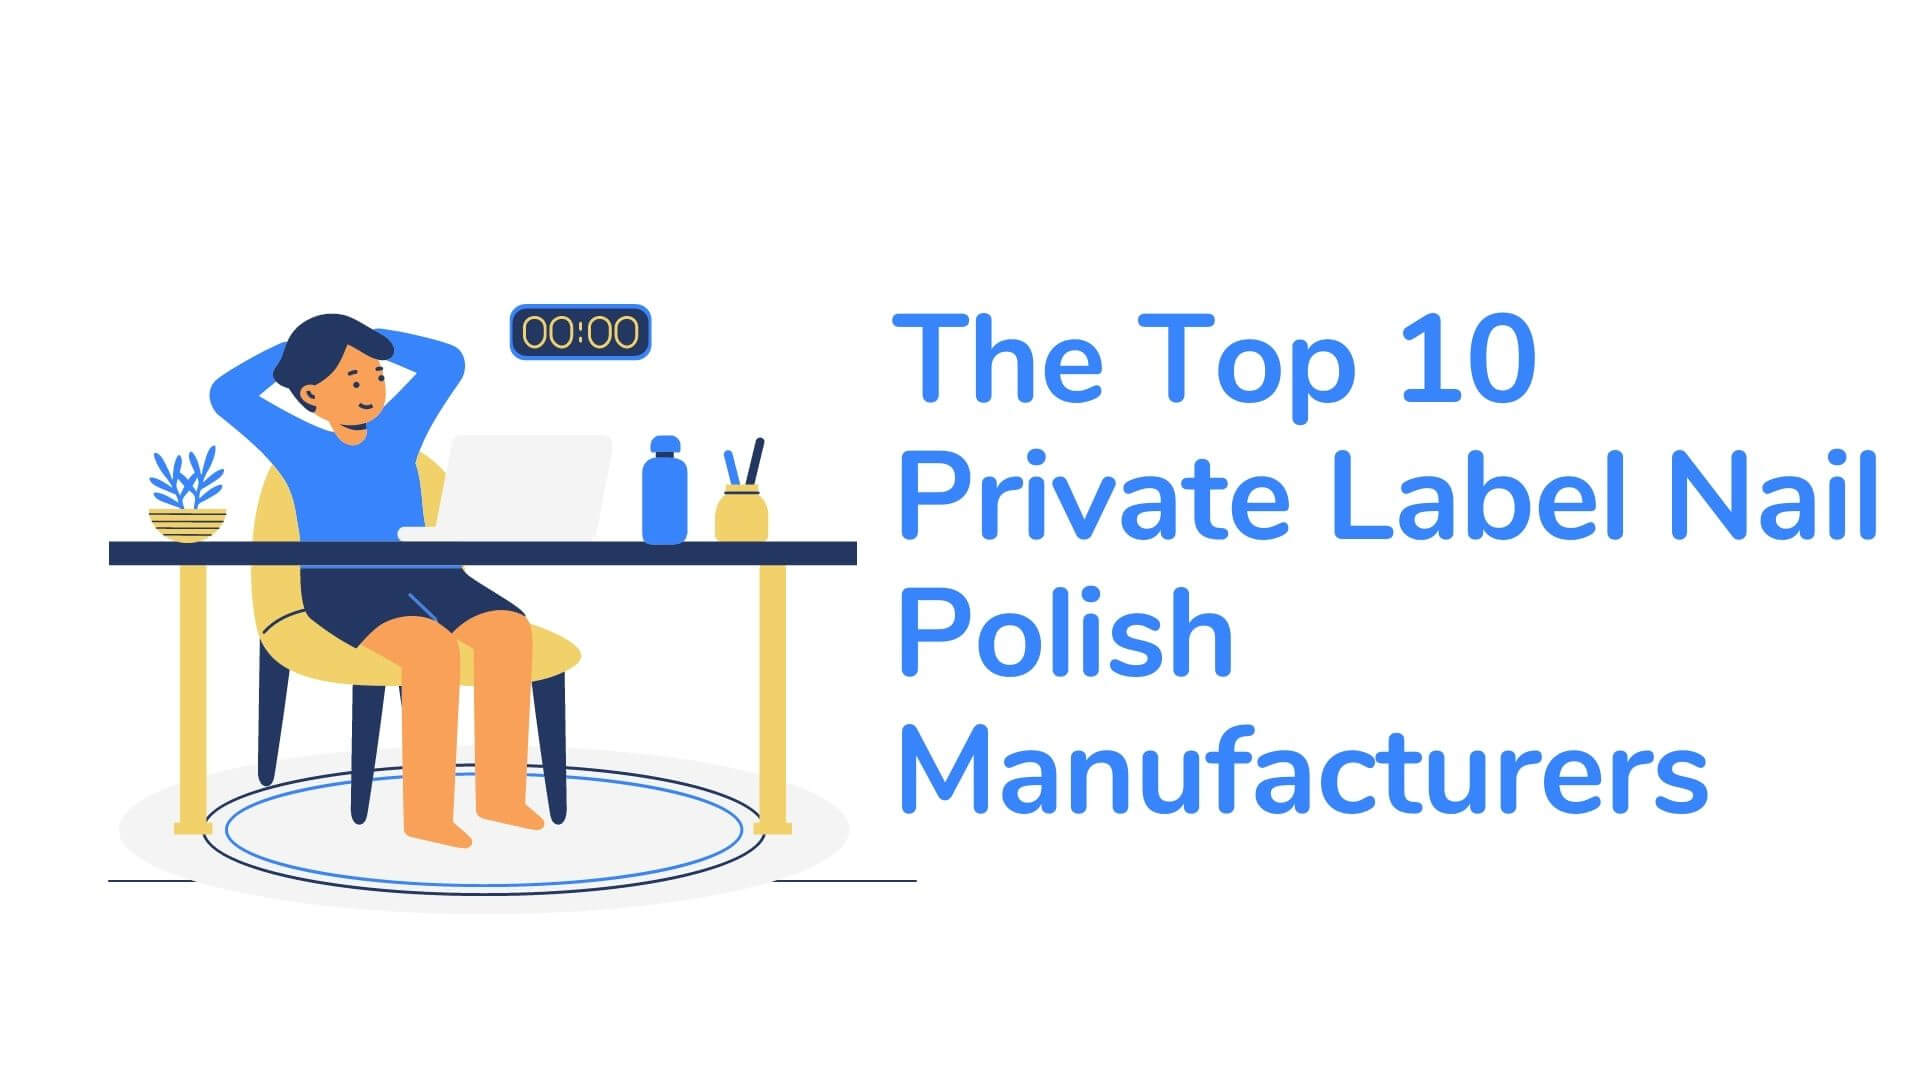 The Top 10 Private Label Nail Polish Manufacturers - Bestfulfill  -Professional Dropshipping Sourcing and Fulfillment Agent